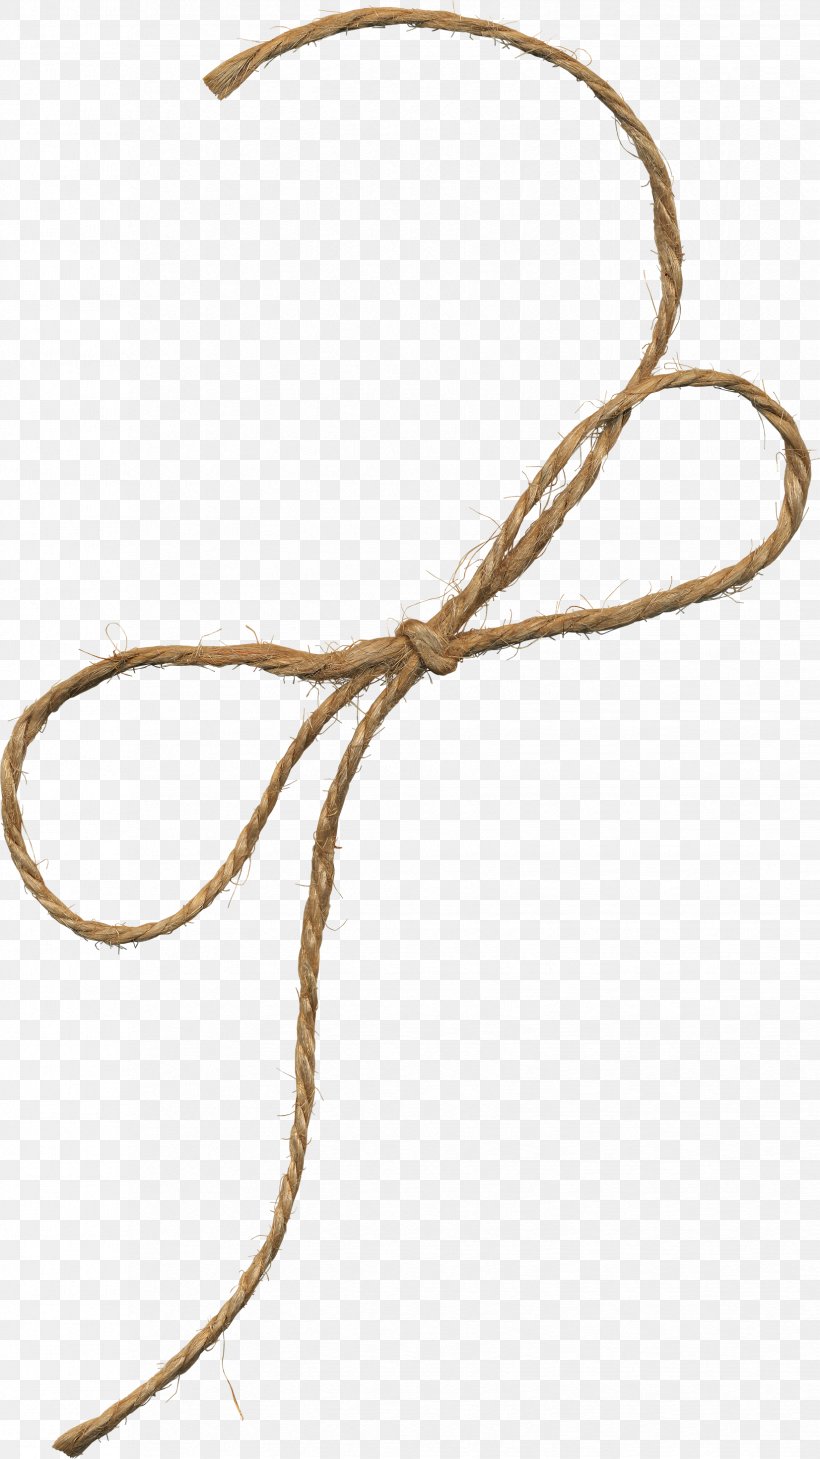 Rope Hemp Shoelace Knot, PNG, 1652x2940px, Rope, Bow Tie, Hemp, Knot, Lasso Download Free